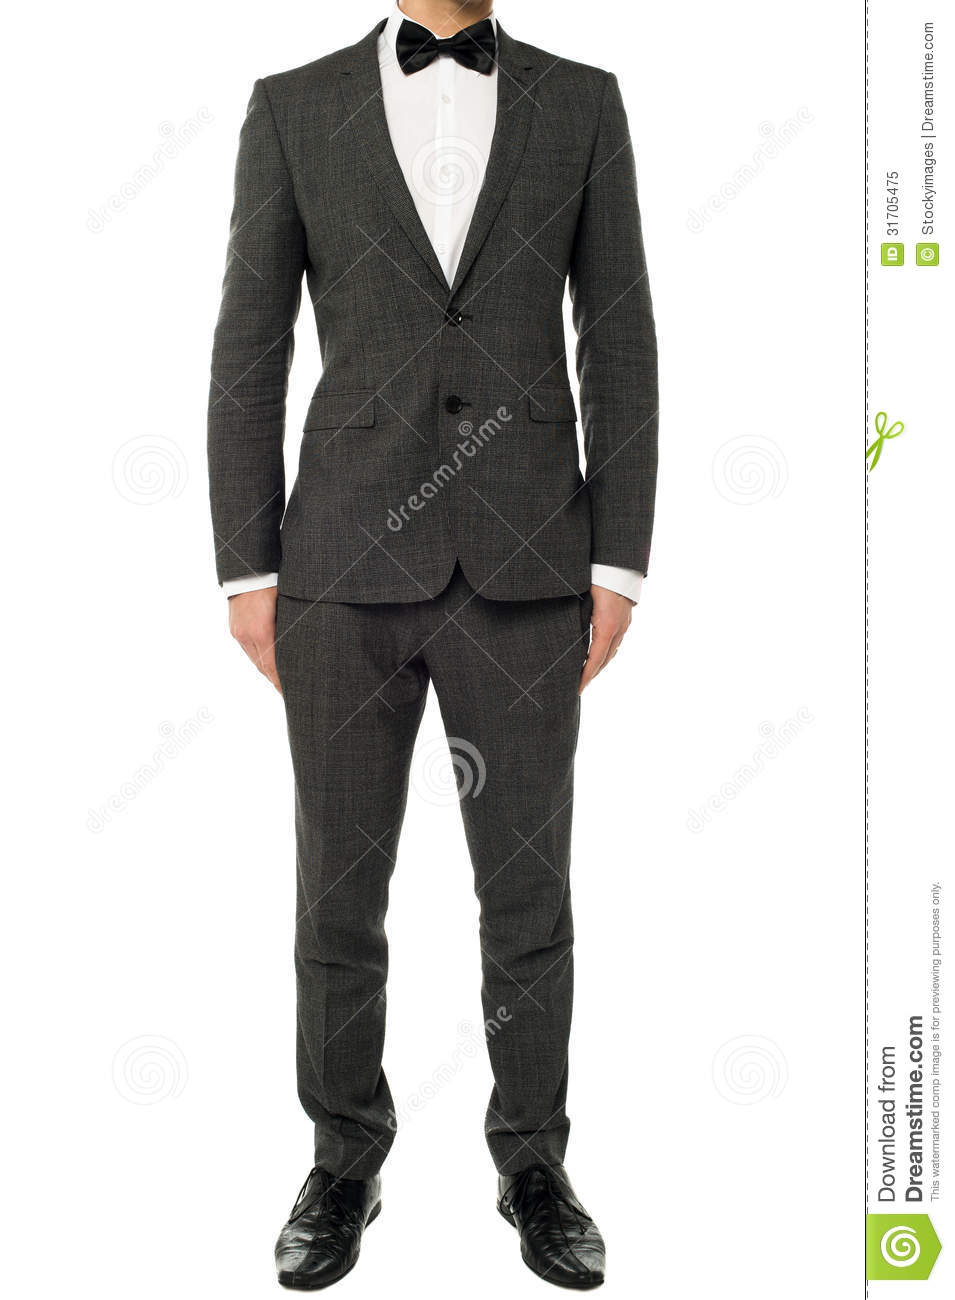 Cropped Image Of A Man In Tuxedo Royalty Free Stock Photo   Image